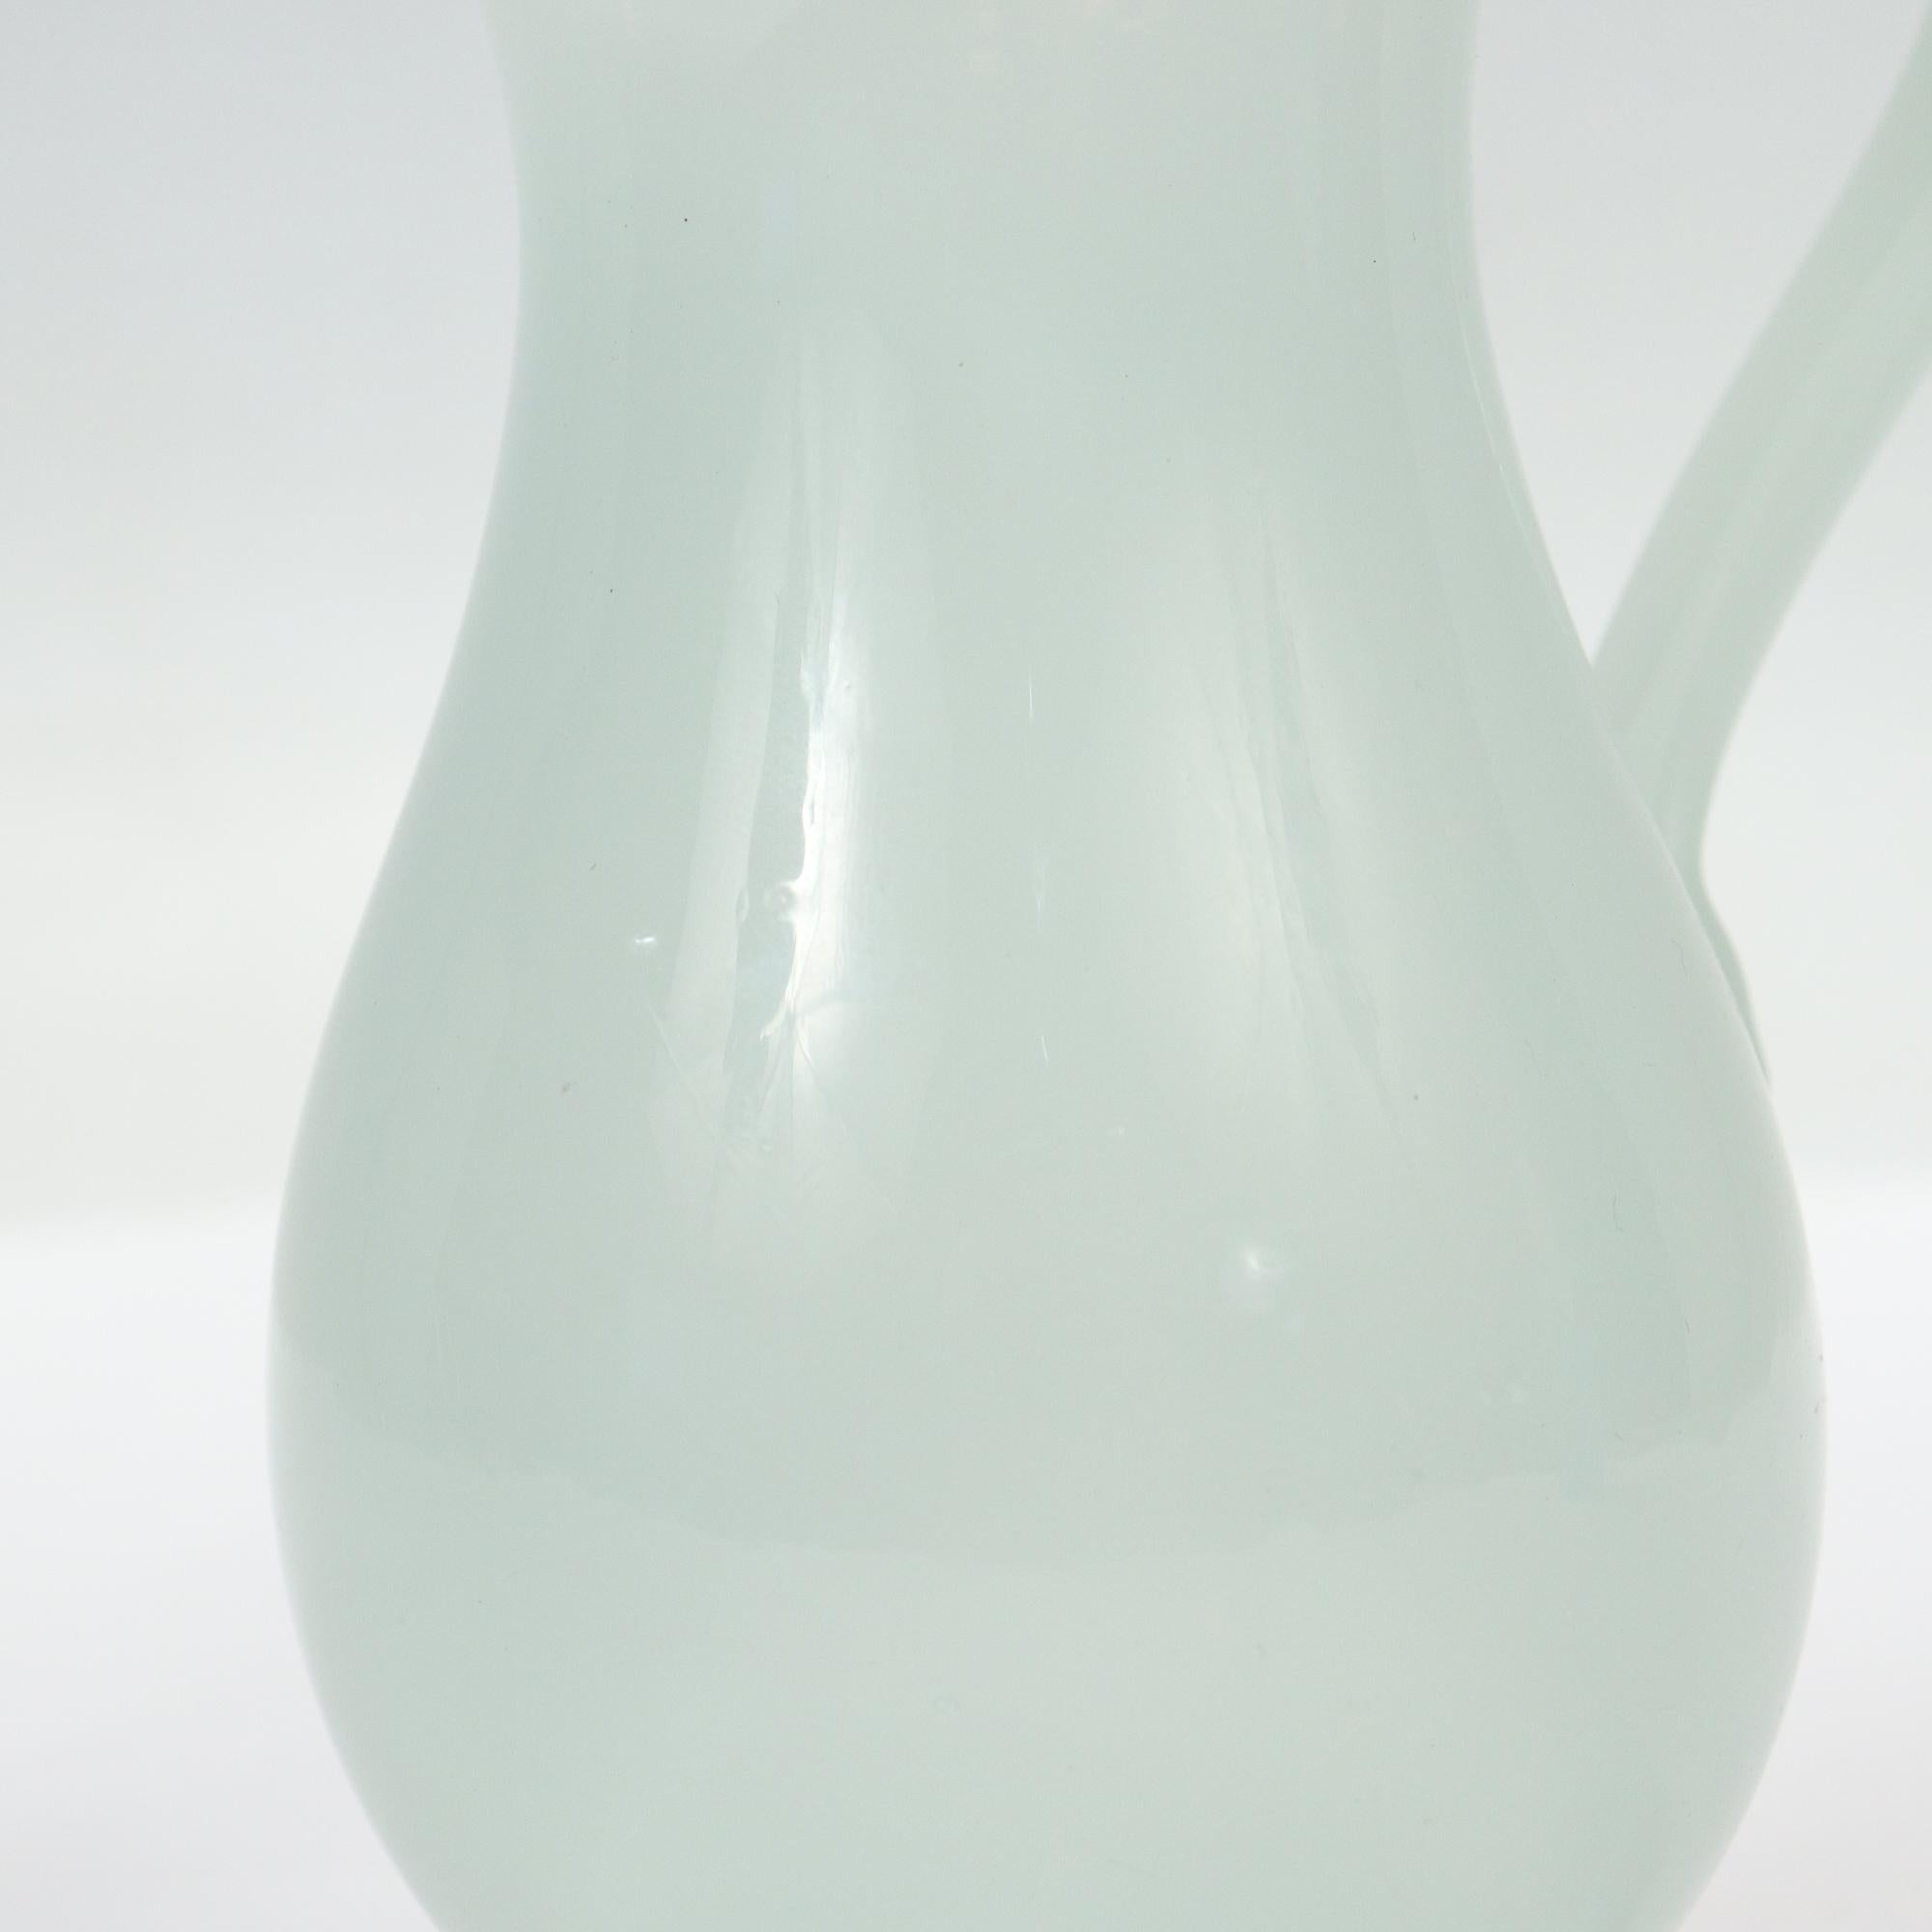 19th Century Antique American Clam Broth Glass Creamer or Milk Jug For Sale